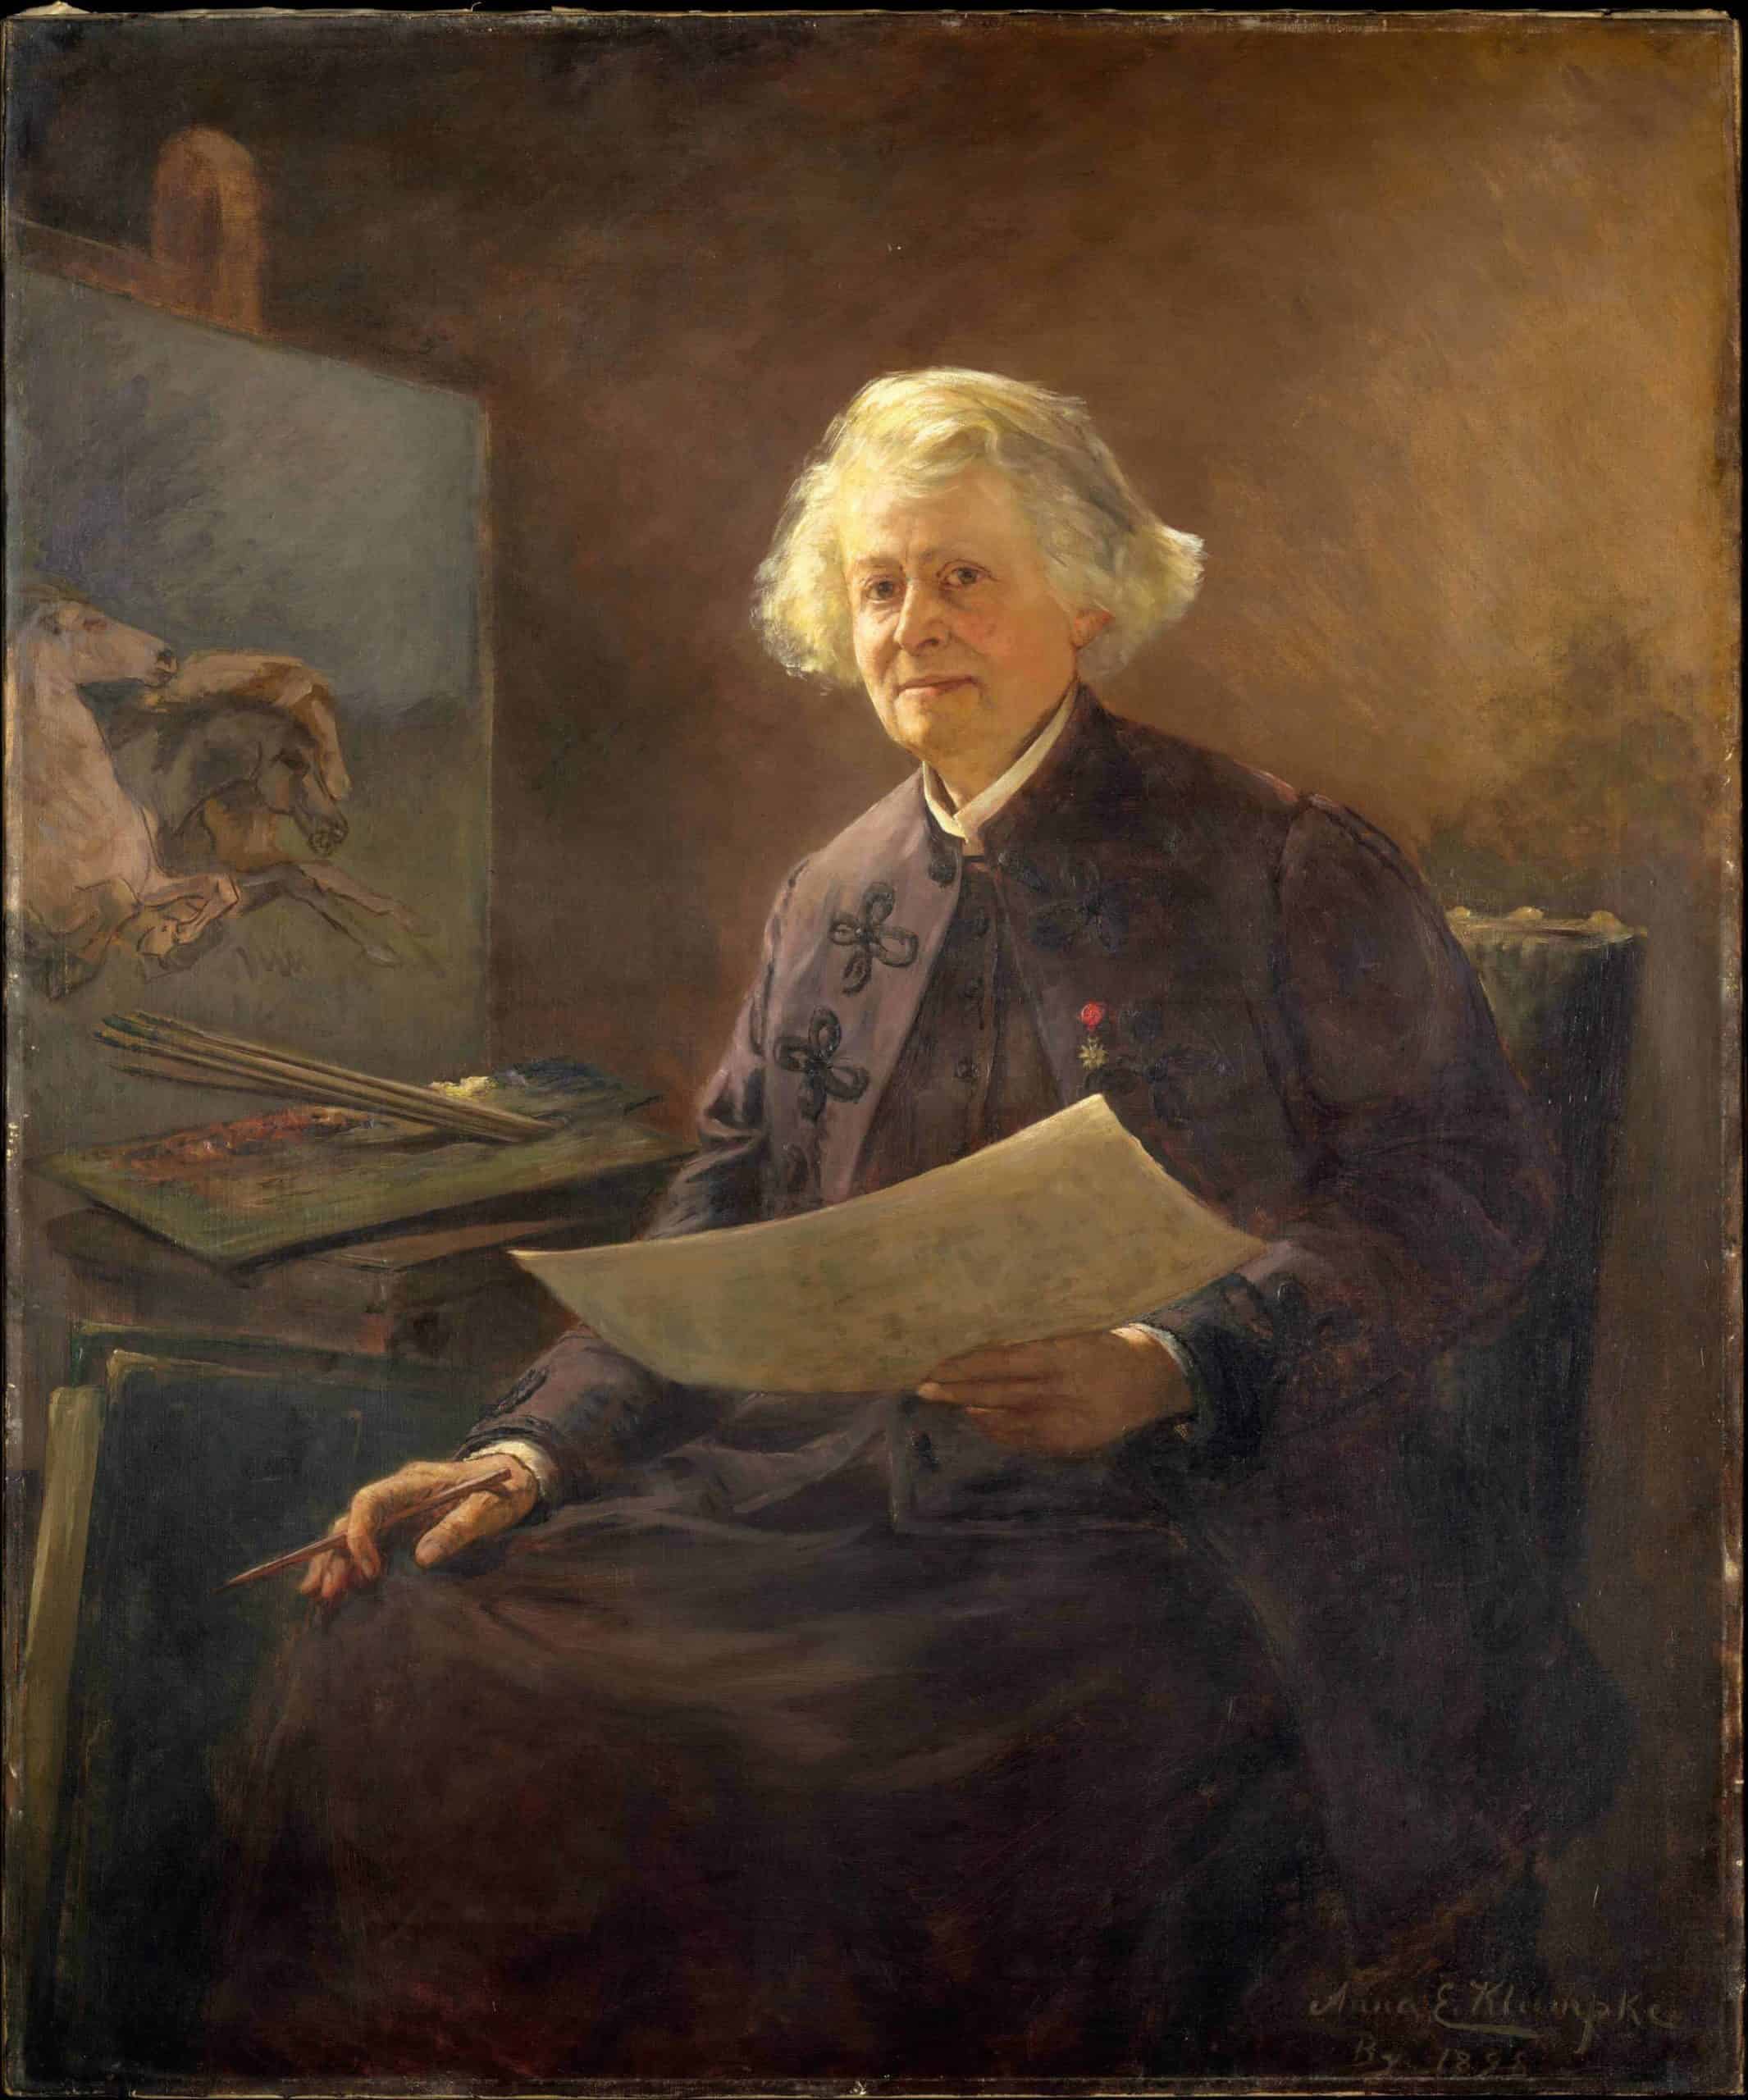 Anna Klumpke's portrait of the internationally known Parisian artist Rosa Bonheur appeared at the Clark Art Institute in Williamstown in Women Artists in Paris 1850 to 1910.